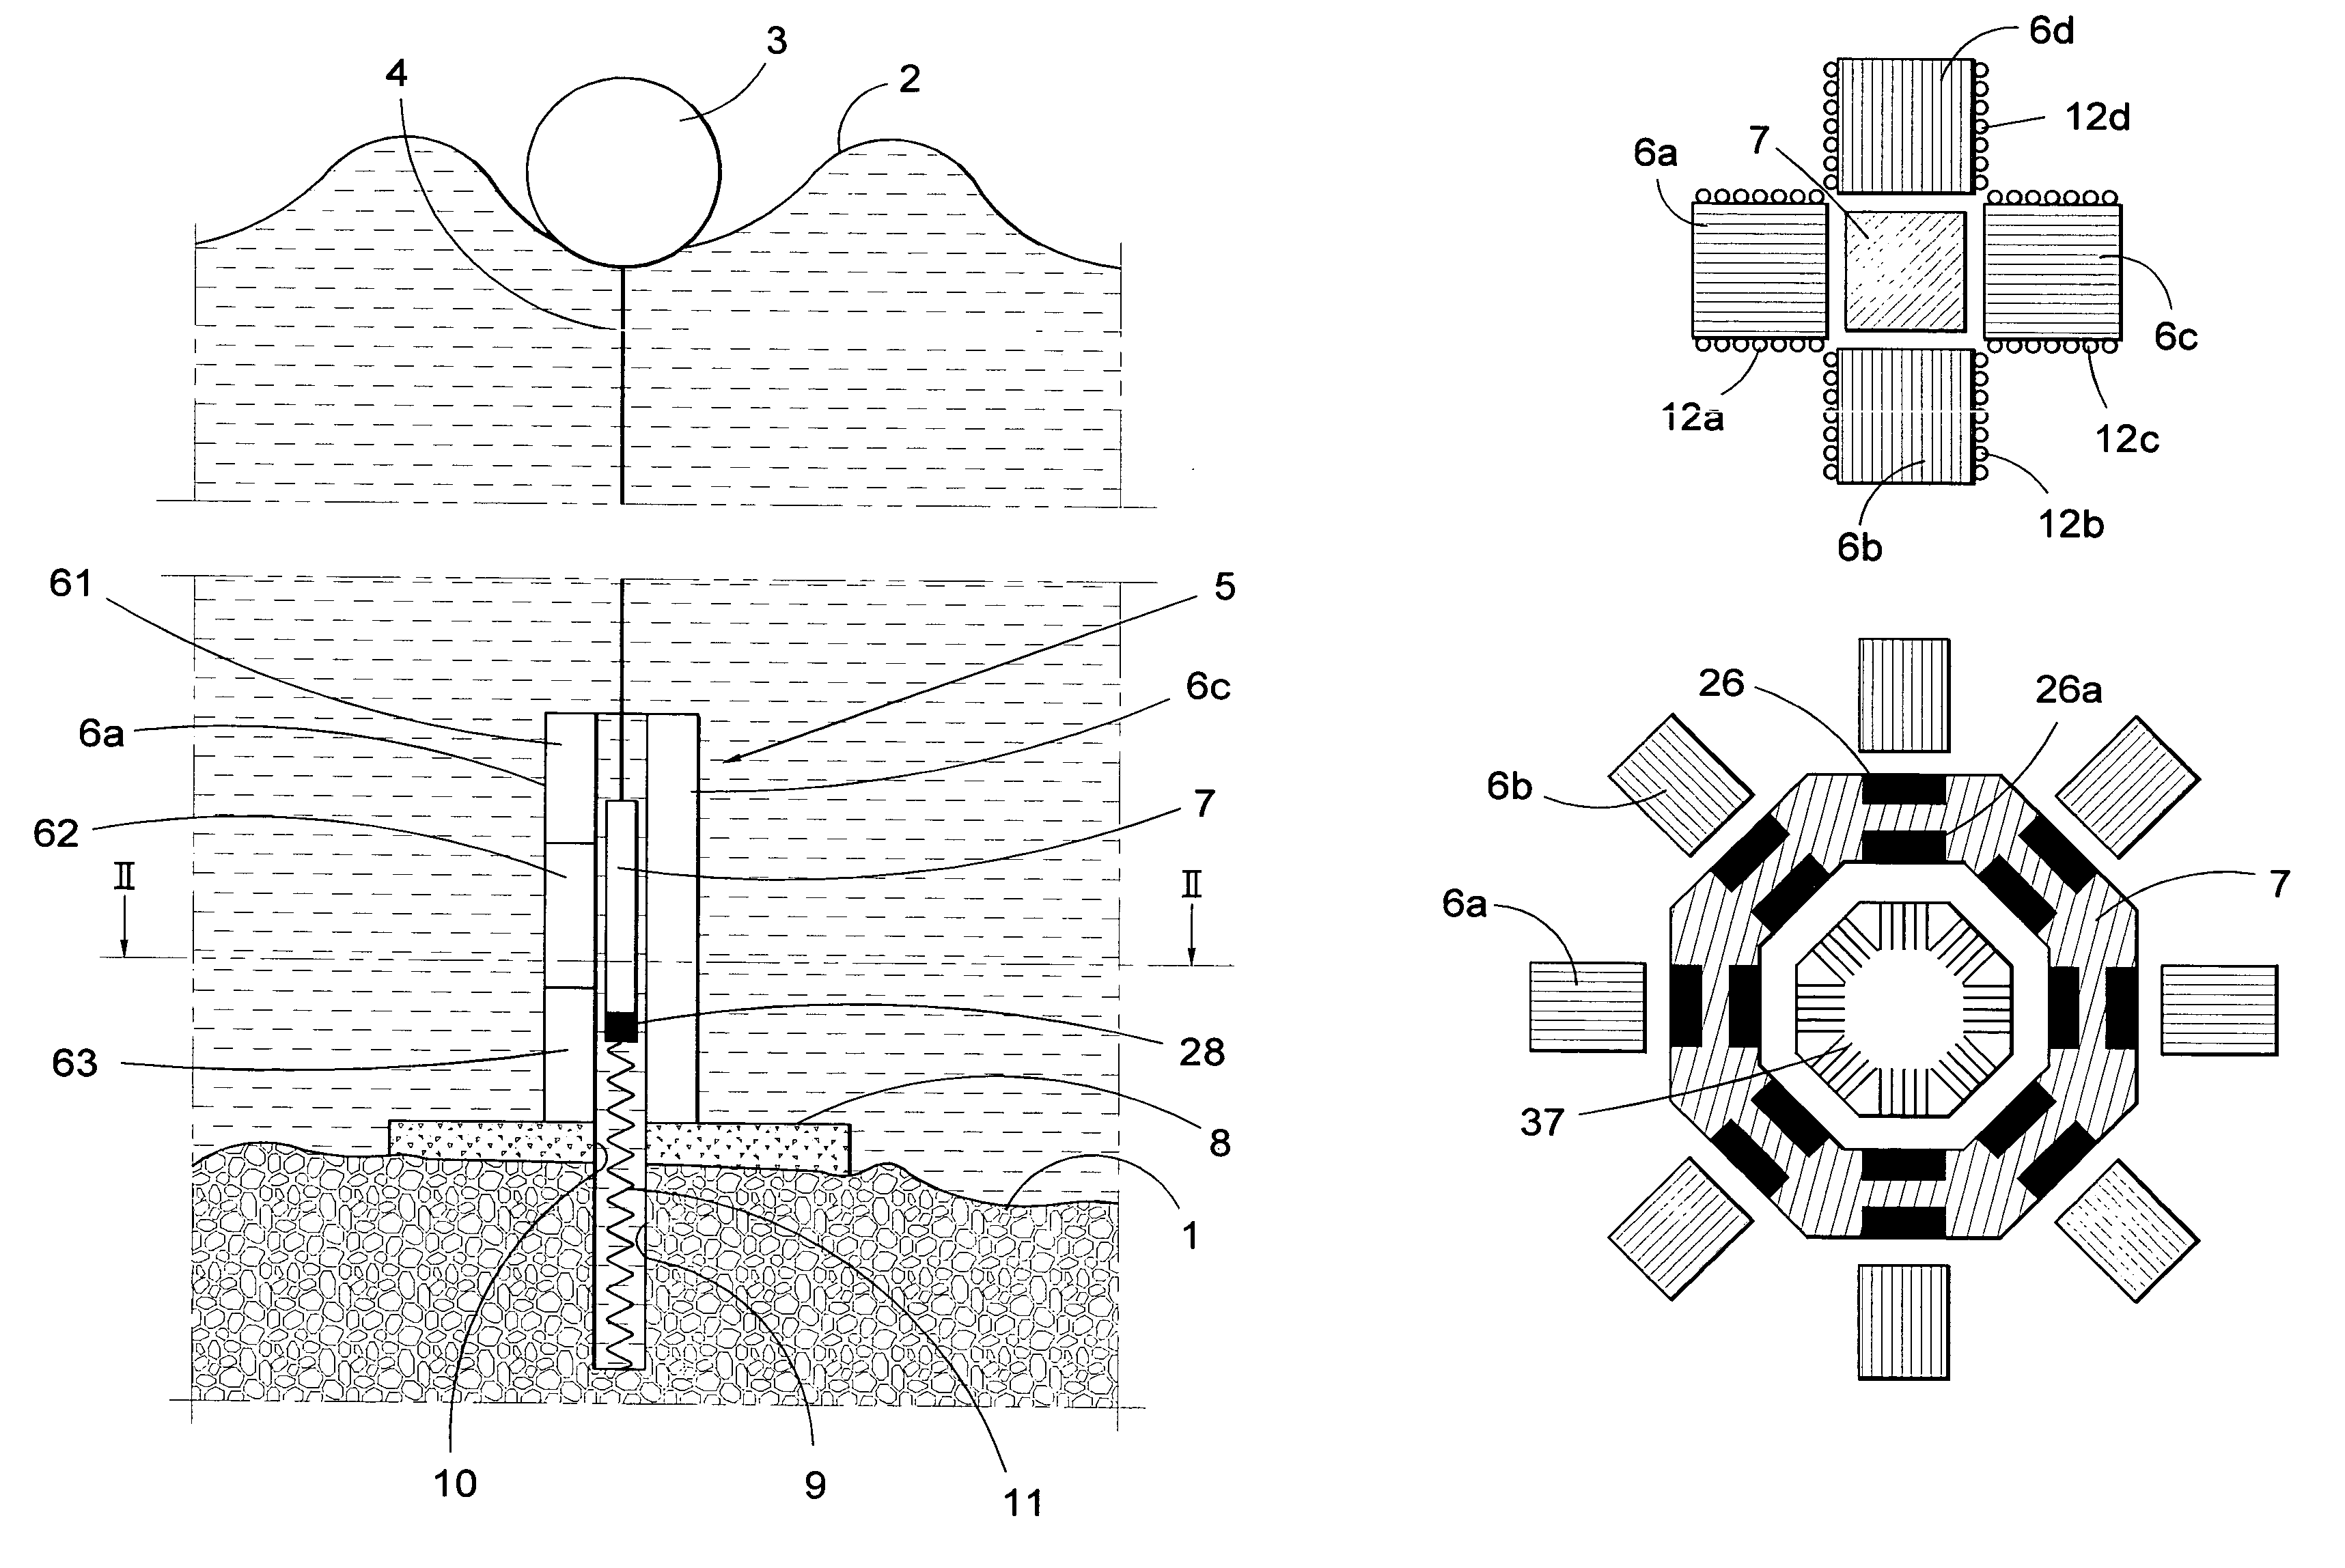 Electric device and method